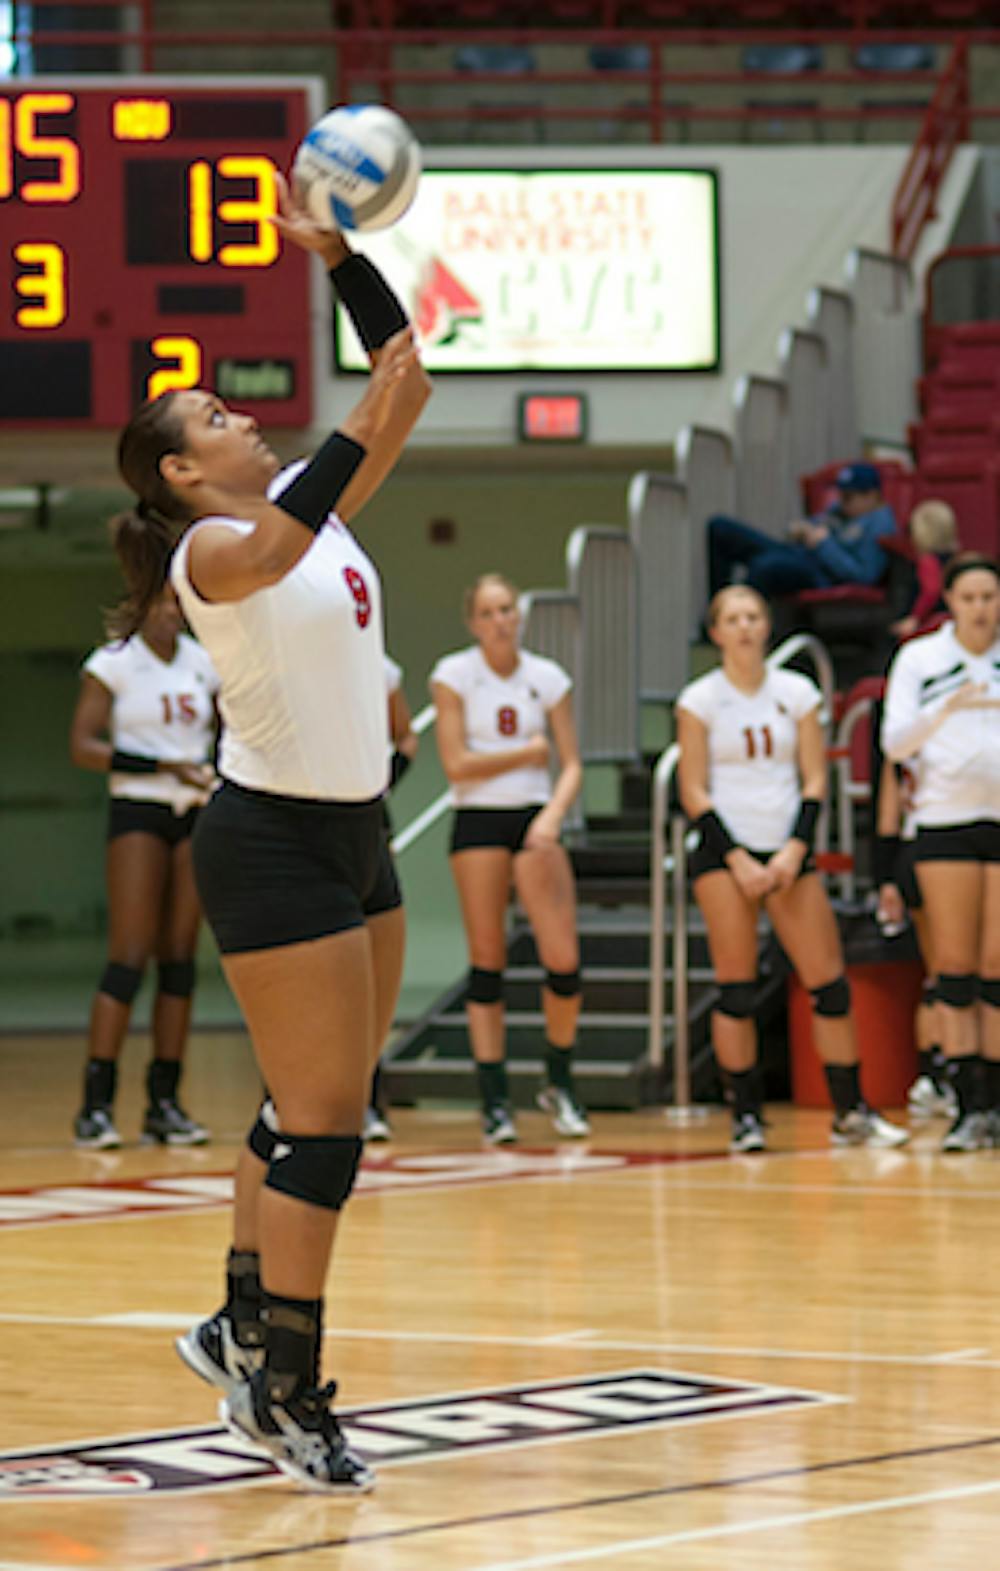 DN PHOTO JONATHAN MIKSANEK Jaclyn Fullove serves the ball during Sunday's game against Northern Illinois University. Fullove played in a total of six sets this year compared to her four sets last year.